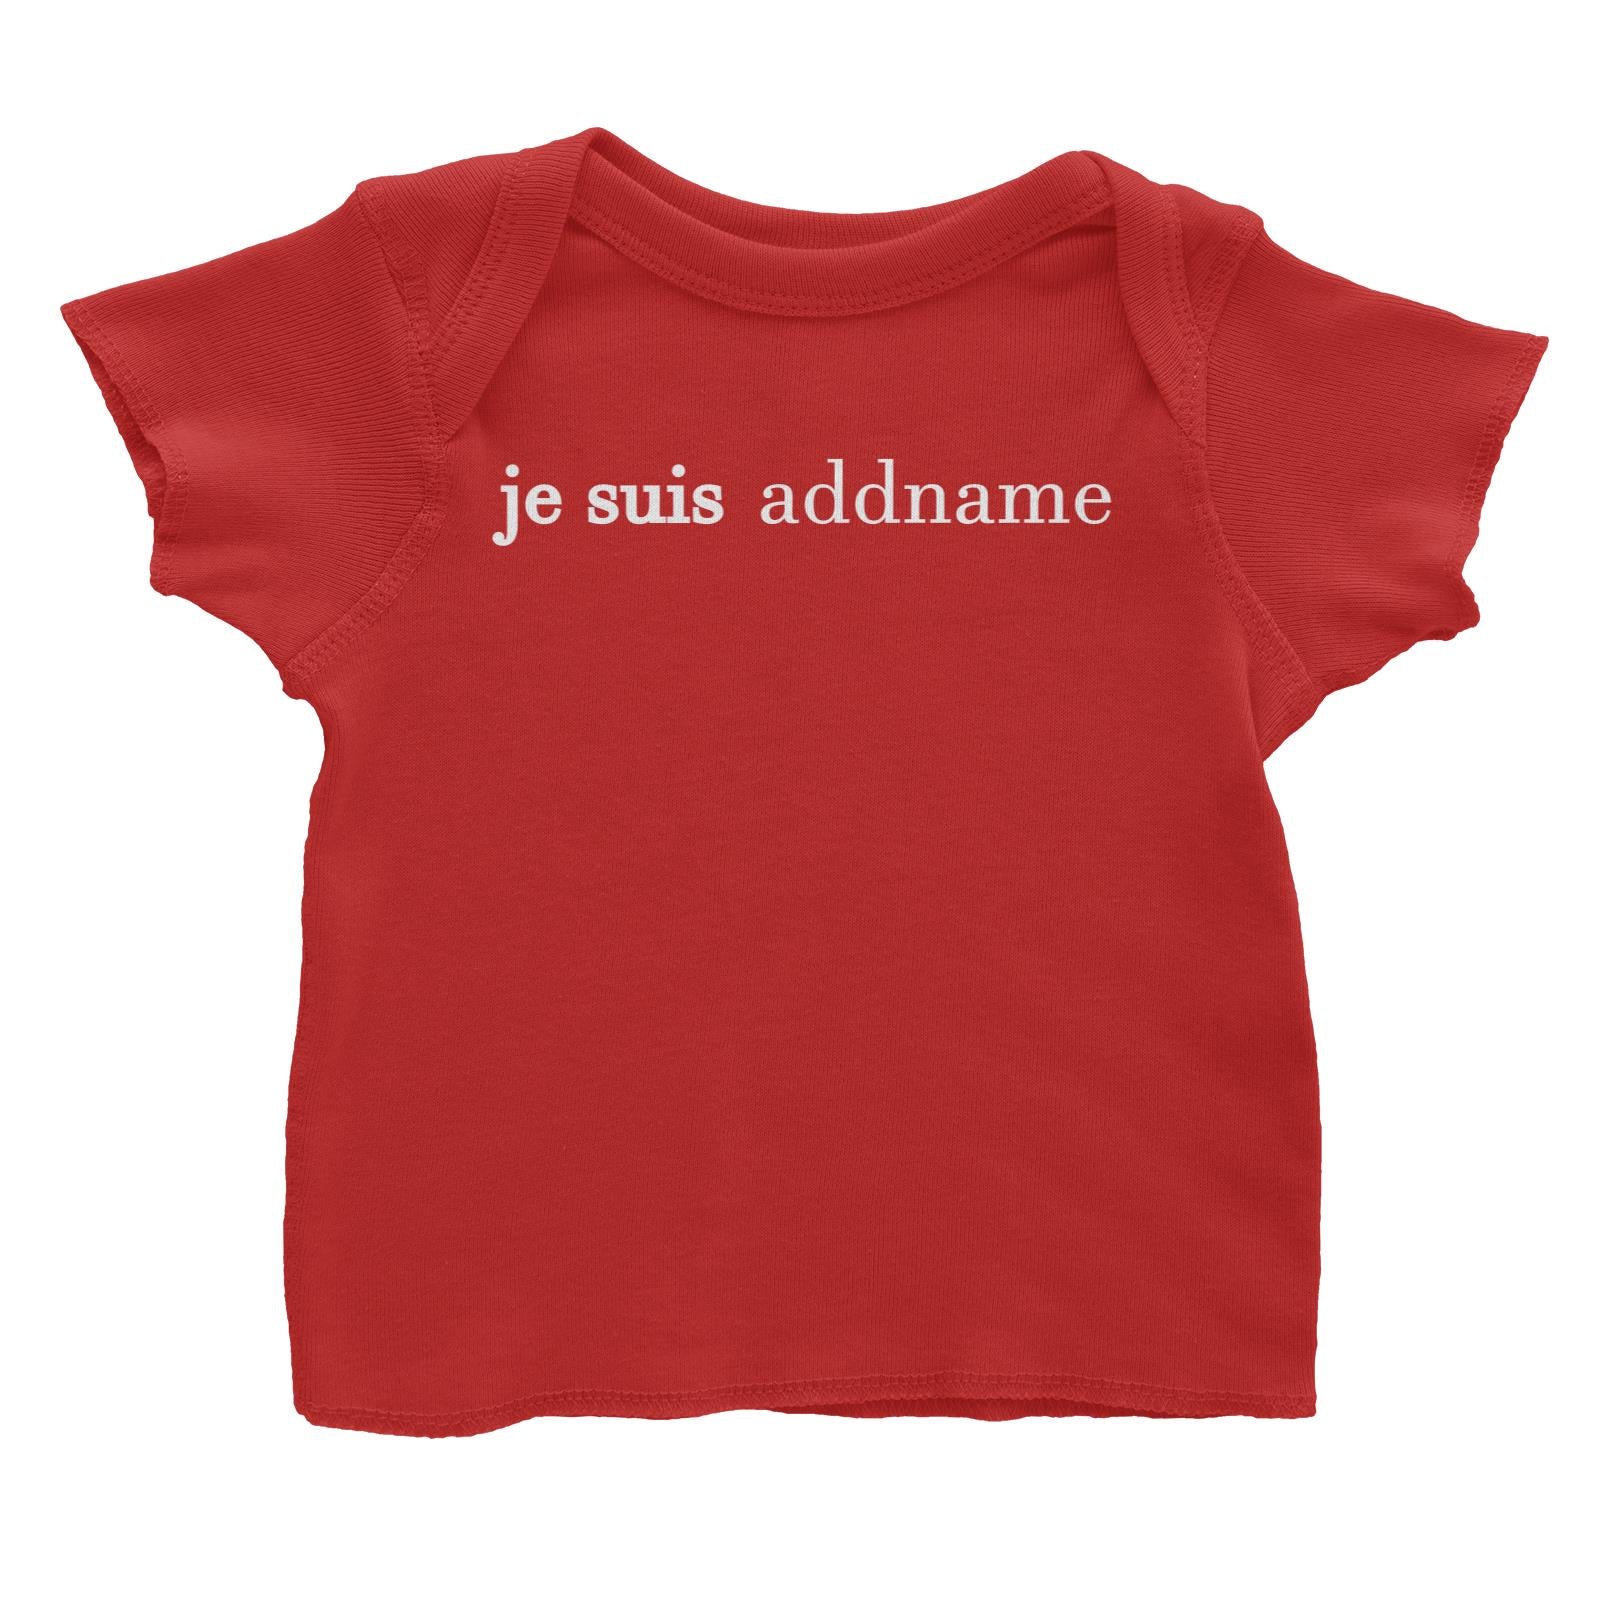 Streetwear Je Suis Addname Baby T-Shirt